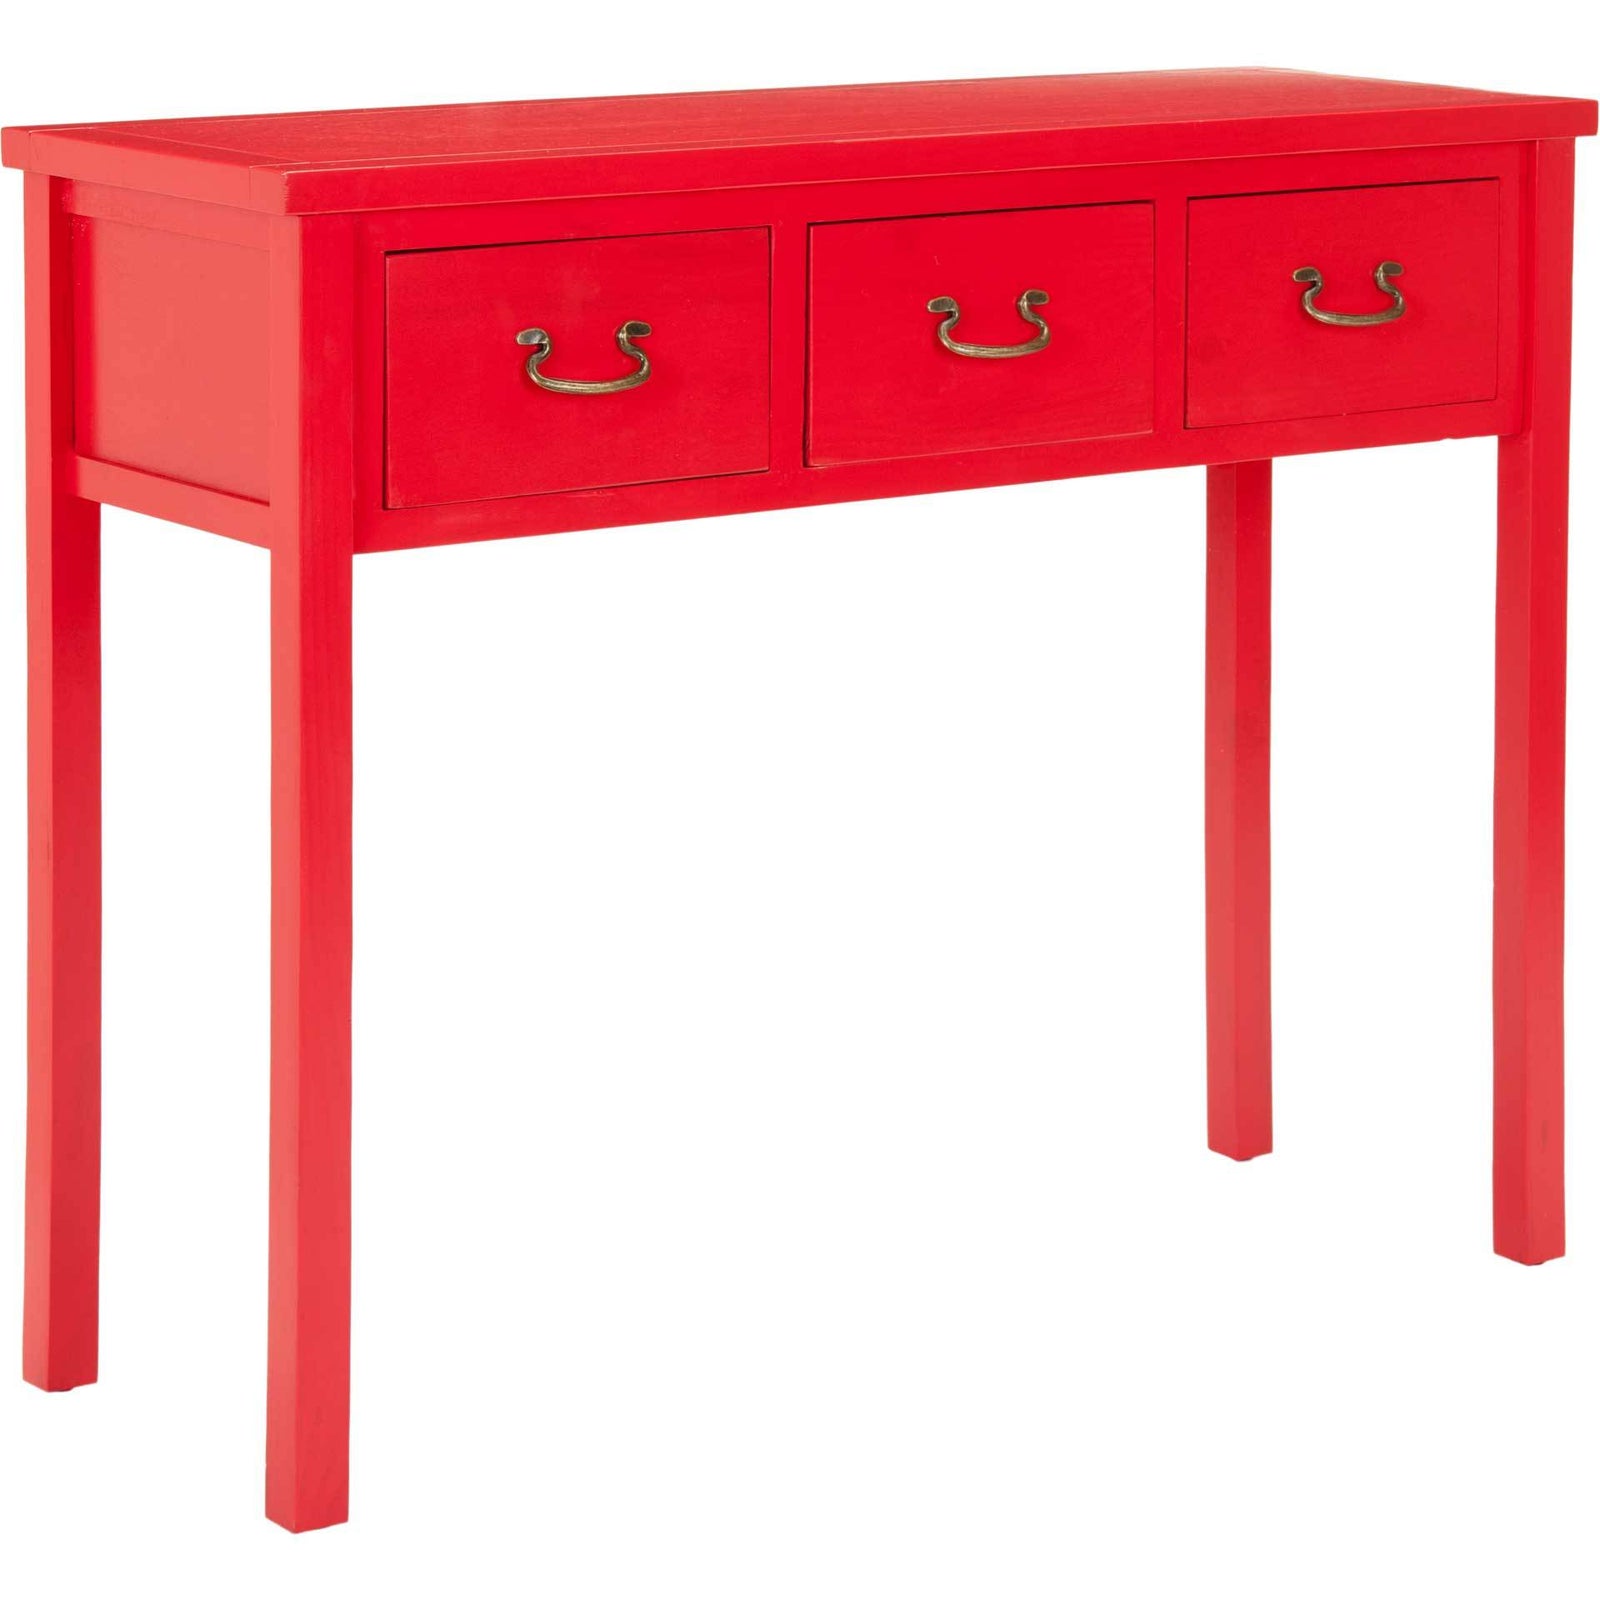 Ciara Console With Storage Drawers